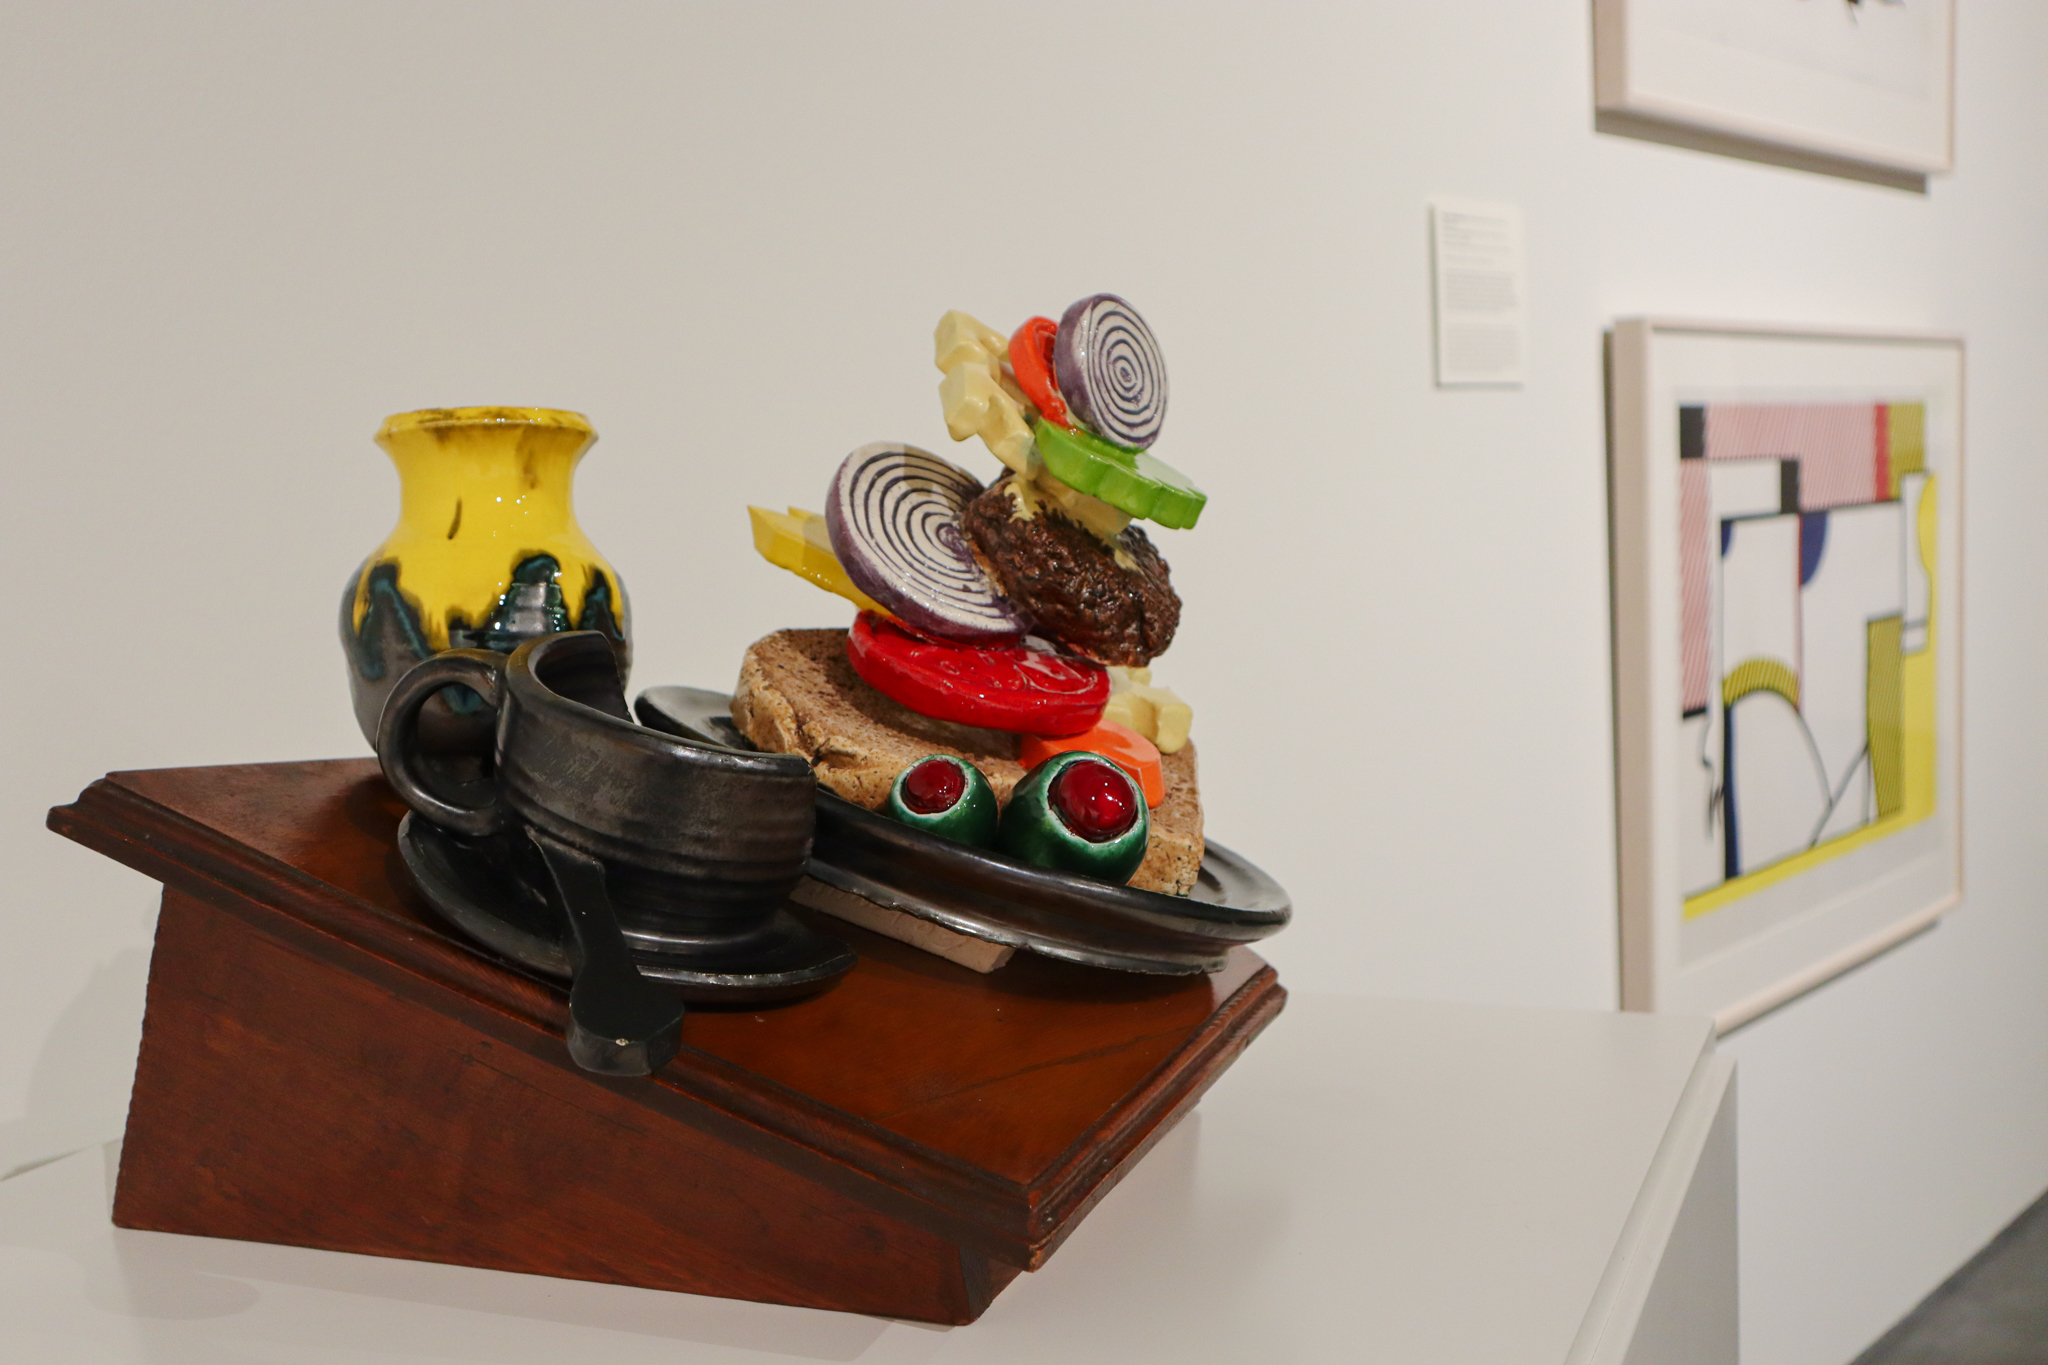 A ceramic sculpture is in frame. In Pop Art style with bright colors, we see a mug with coffee in it, a jar with what looks like mustard coming out of the top, and a deconstructed sandwich with a patty, onion, lettuce, cheese, tomato and olives on a plate